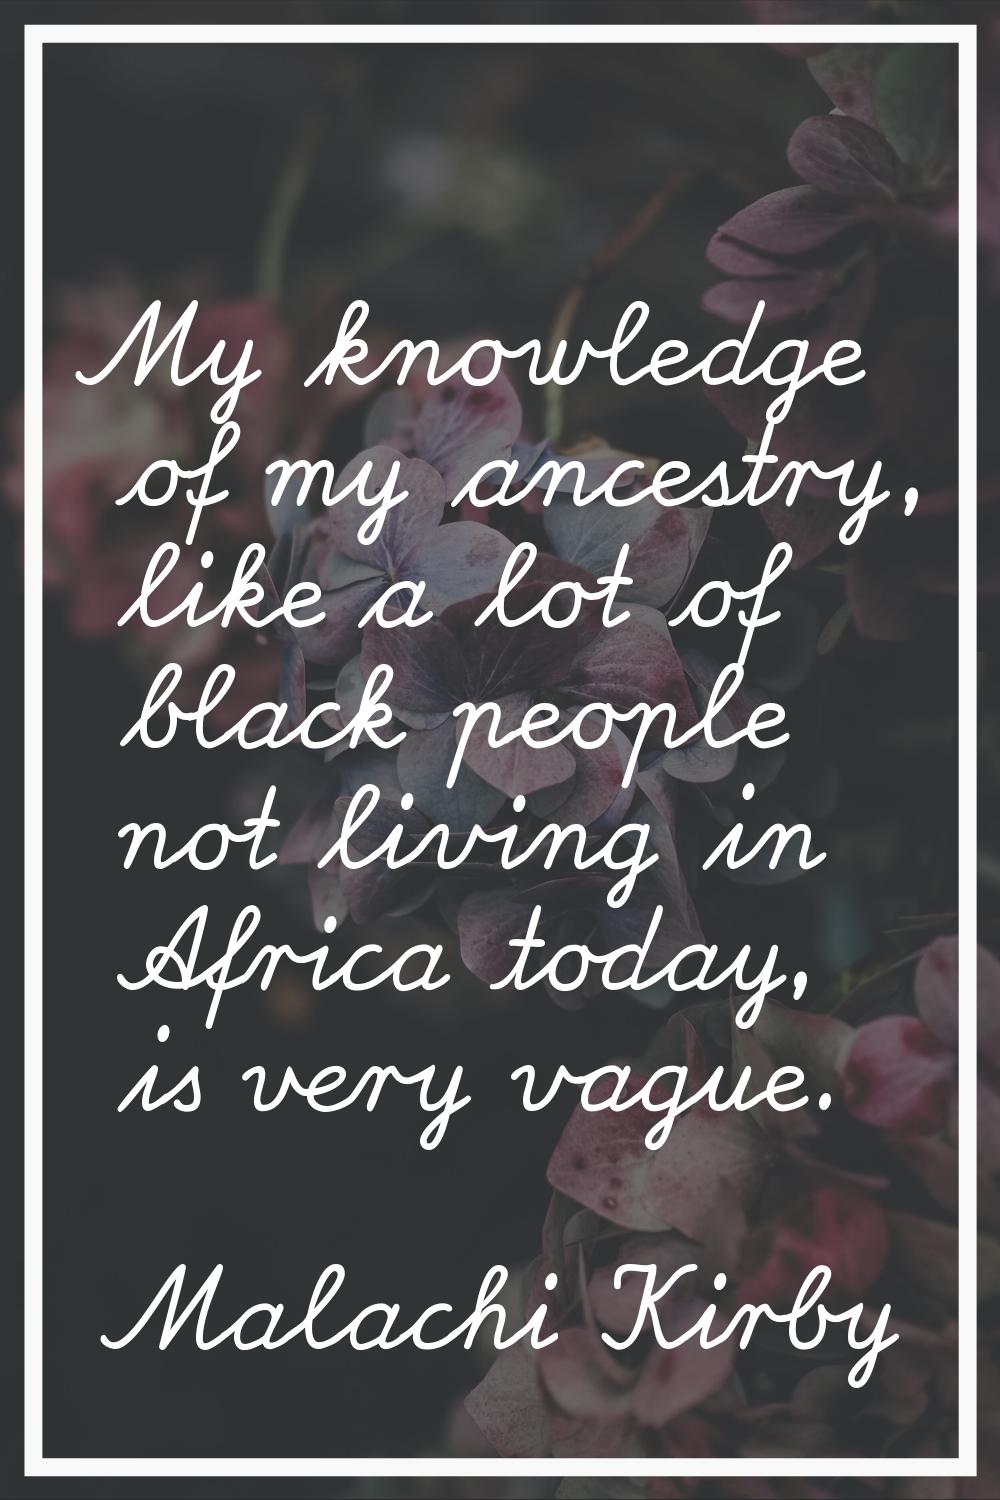 My knowledge of my ancestry, like a lot of black people not living in Africa today, is very vague.